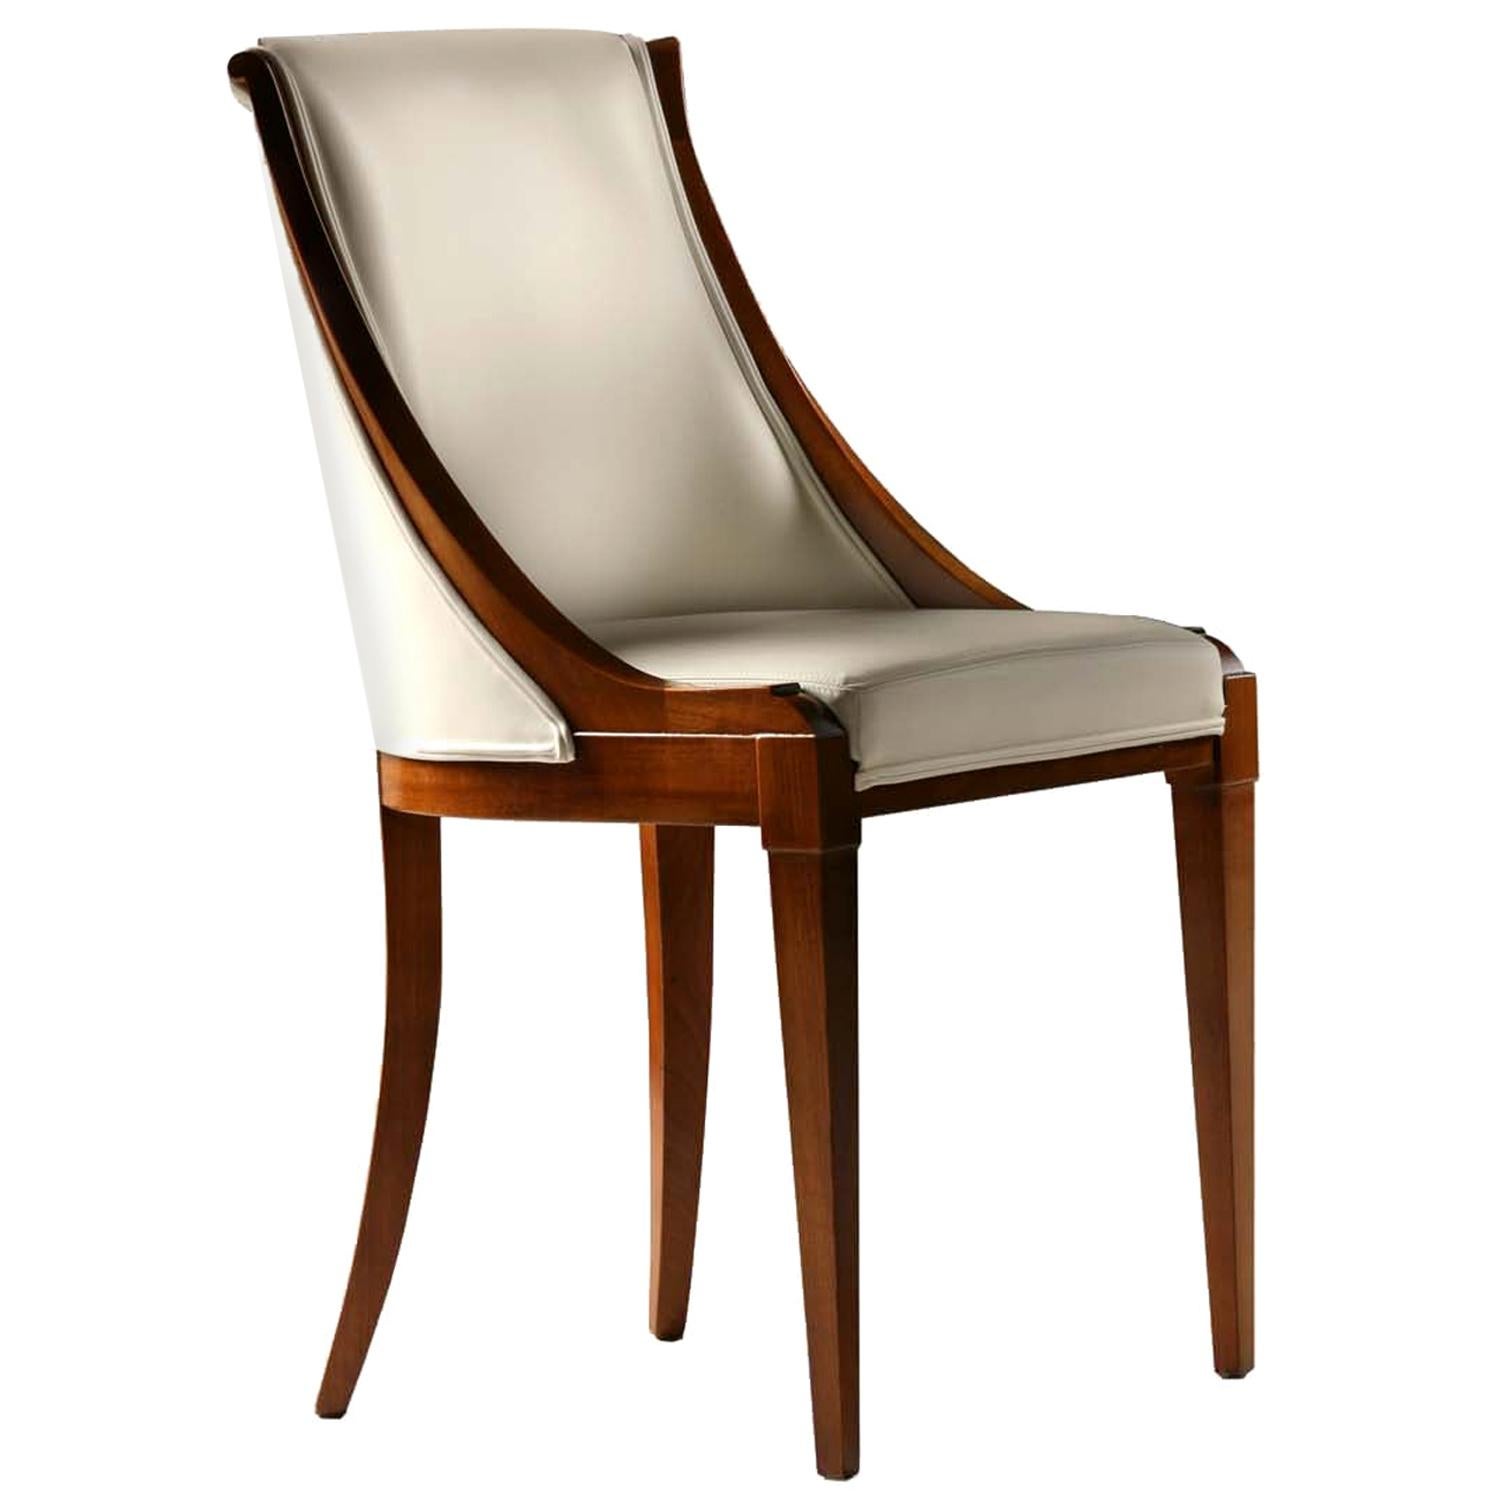 Musa, Upholstered Chair Made of Cherrywood For Sale